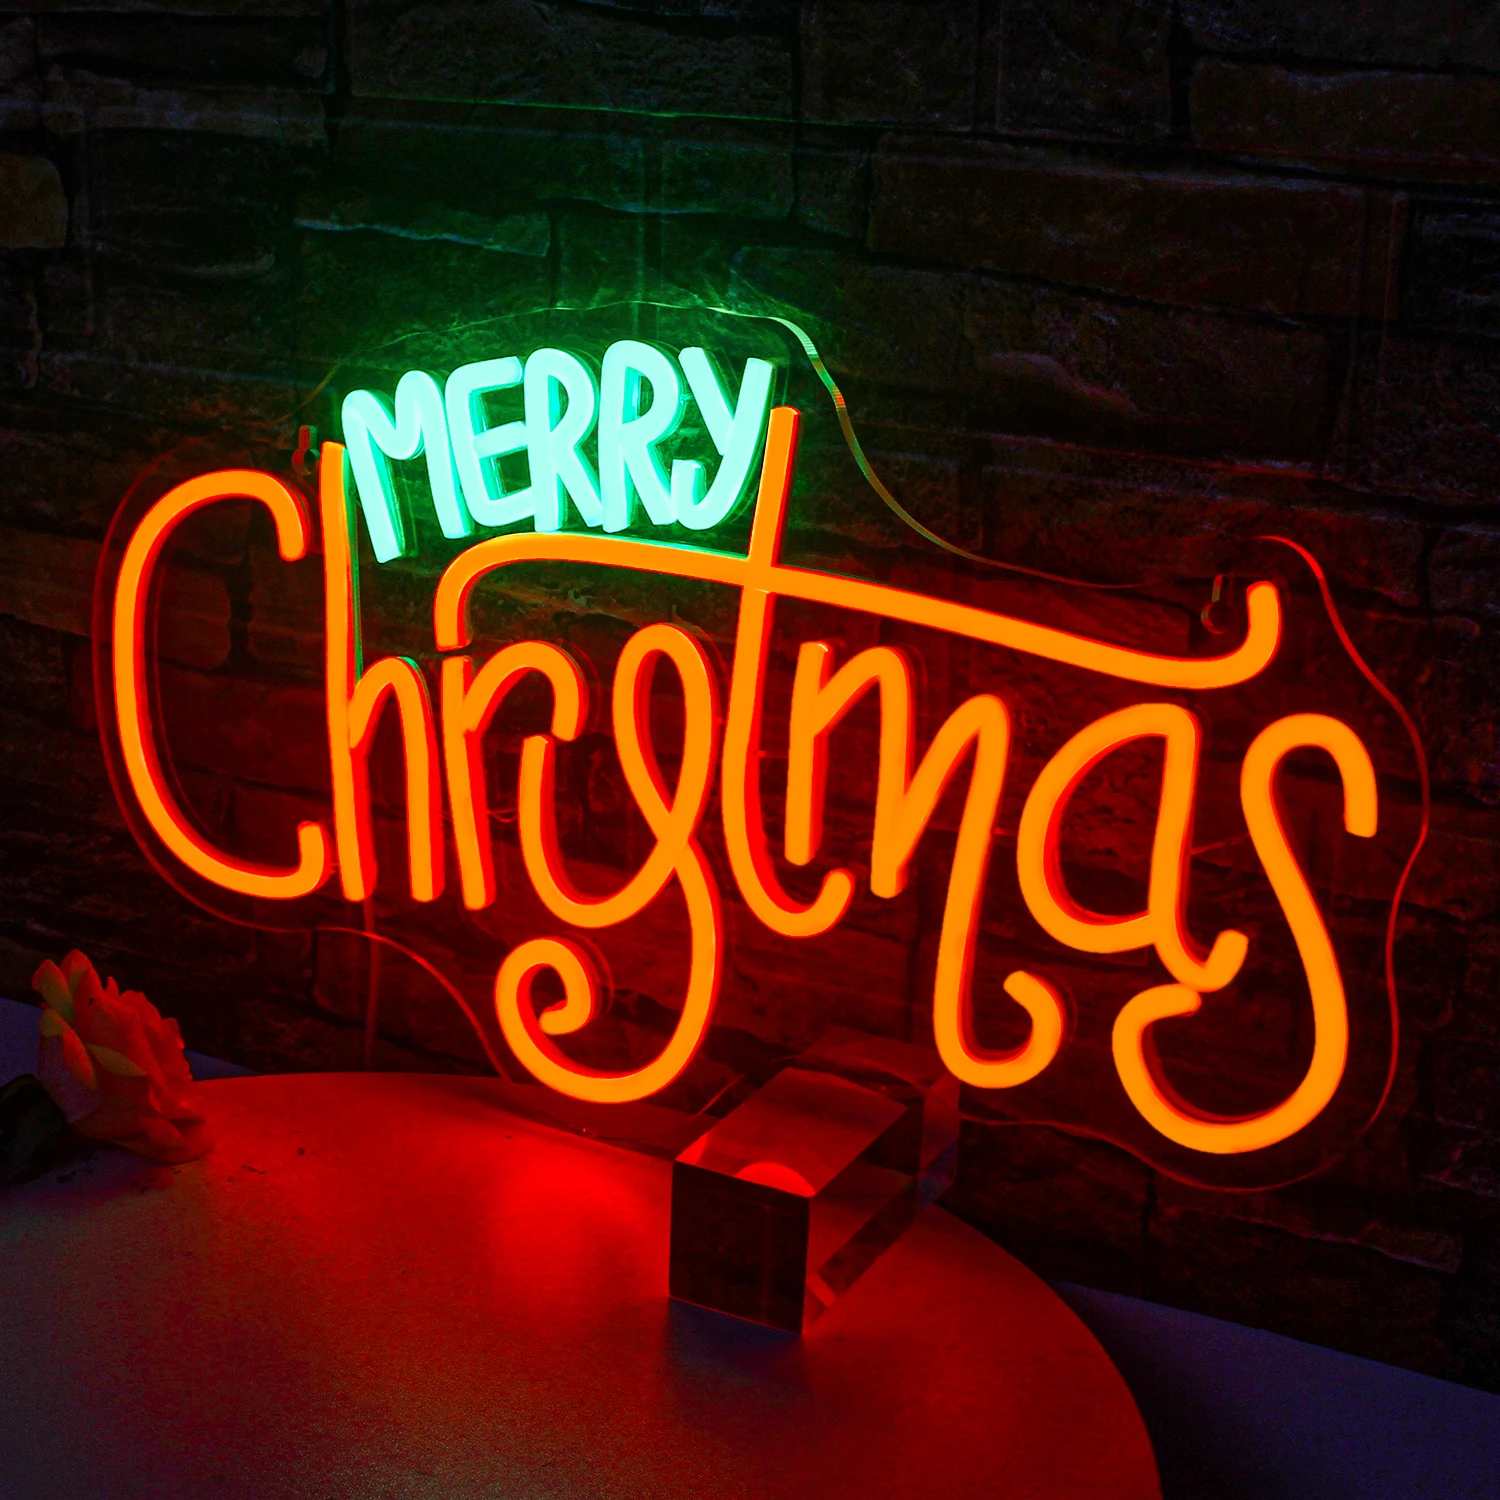 Merry Christmas Neon Sign Led Neon Light Wall Decor Usb Light Up Sign Bedroom Home Party Christmas Decorations Family Kids Gifts led neon sign custom personalized design business signs room wall night lights birthday party wedding holiday decorations